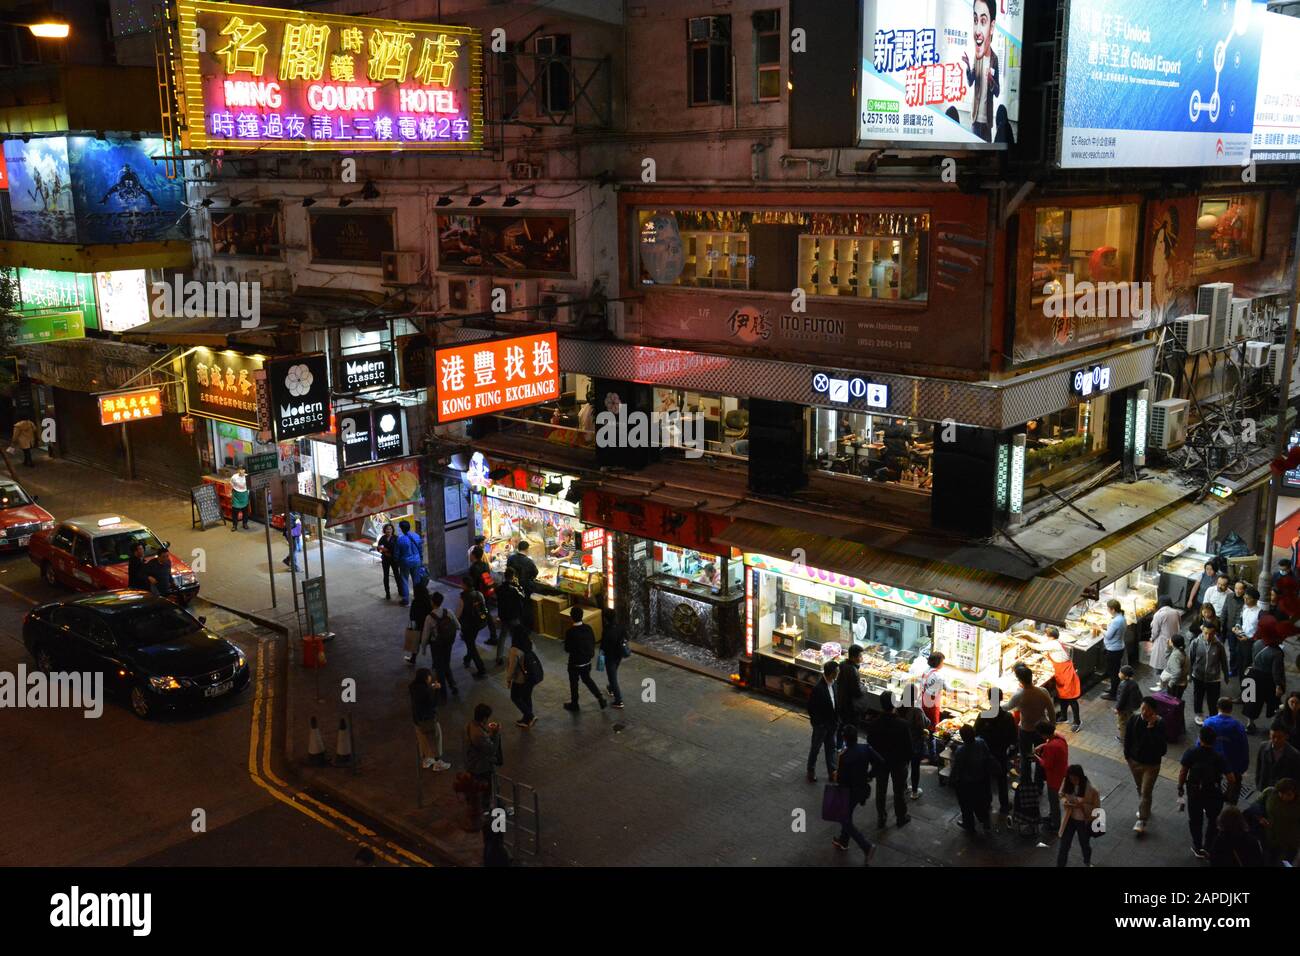 Looking down on a busy street corner on Lockhart Road after dark in the trendy Wan Chai neighborhood of Hong Kong. Stock Photo